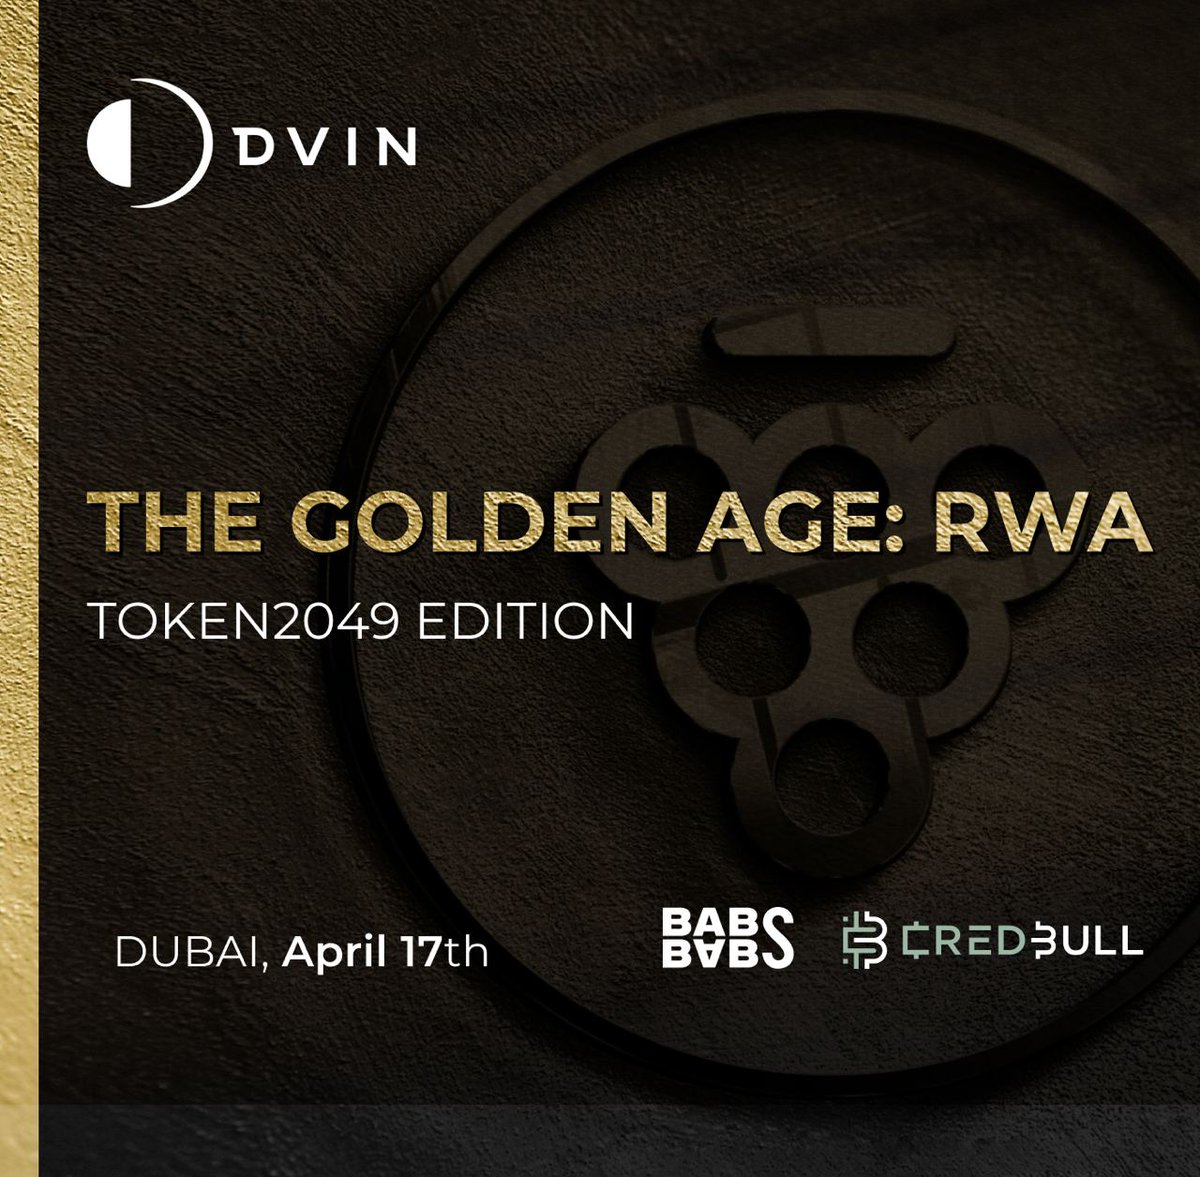 Join us at #TheGoldenAgeRWA side event centered around the inaugural #TOKEN2049 in Dubai bringing together key players in #DeFi sector @clubdvin @credbullDeFi @AvaLabs  @animocabrands @tokentus_AG  @emoney_network  @DSRPTDTweets 
📅 17th of April 
📍Souk Madinat Jumeirah
🎟 RSVP…